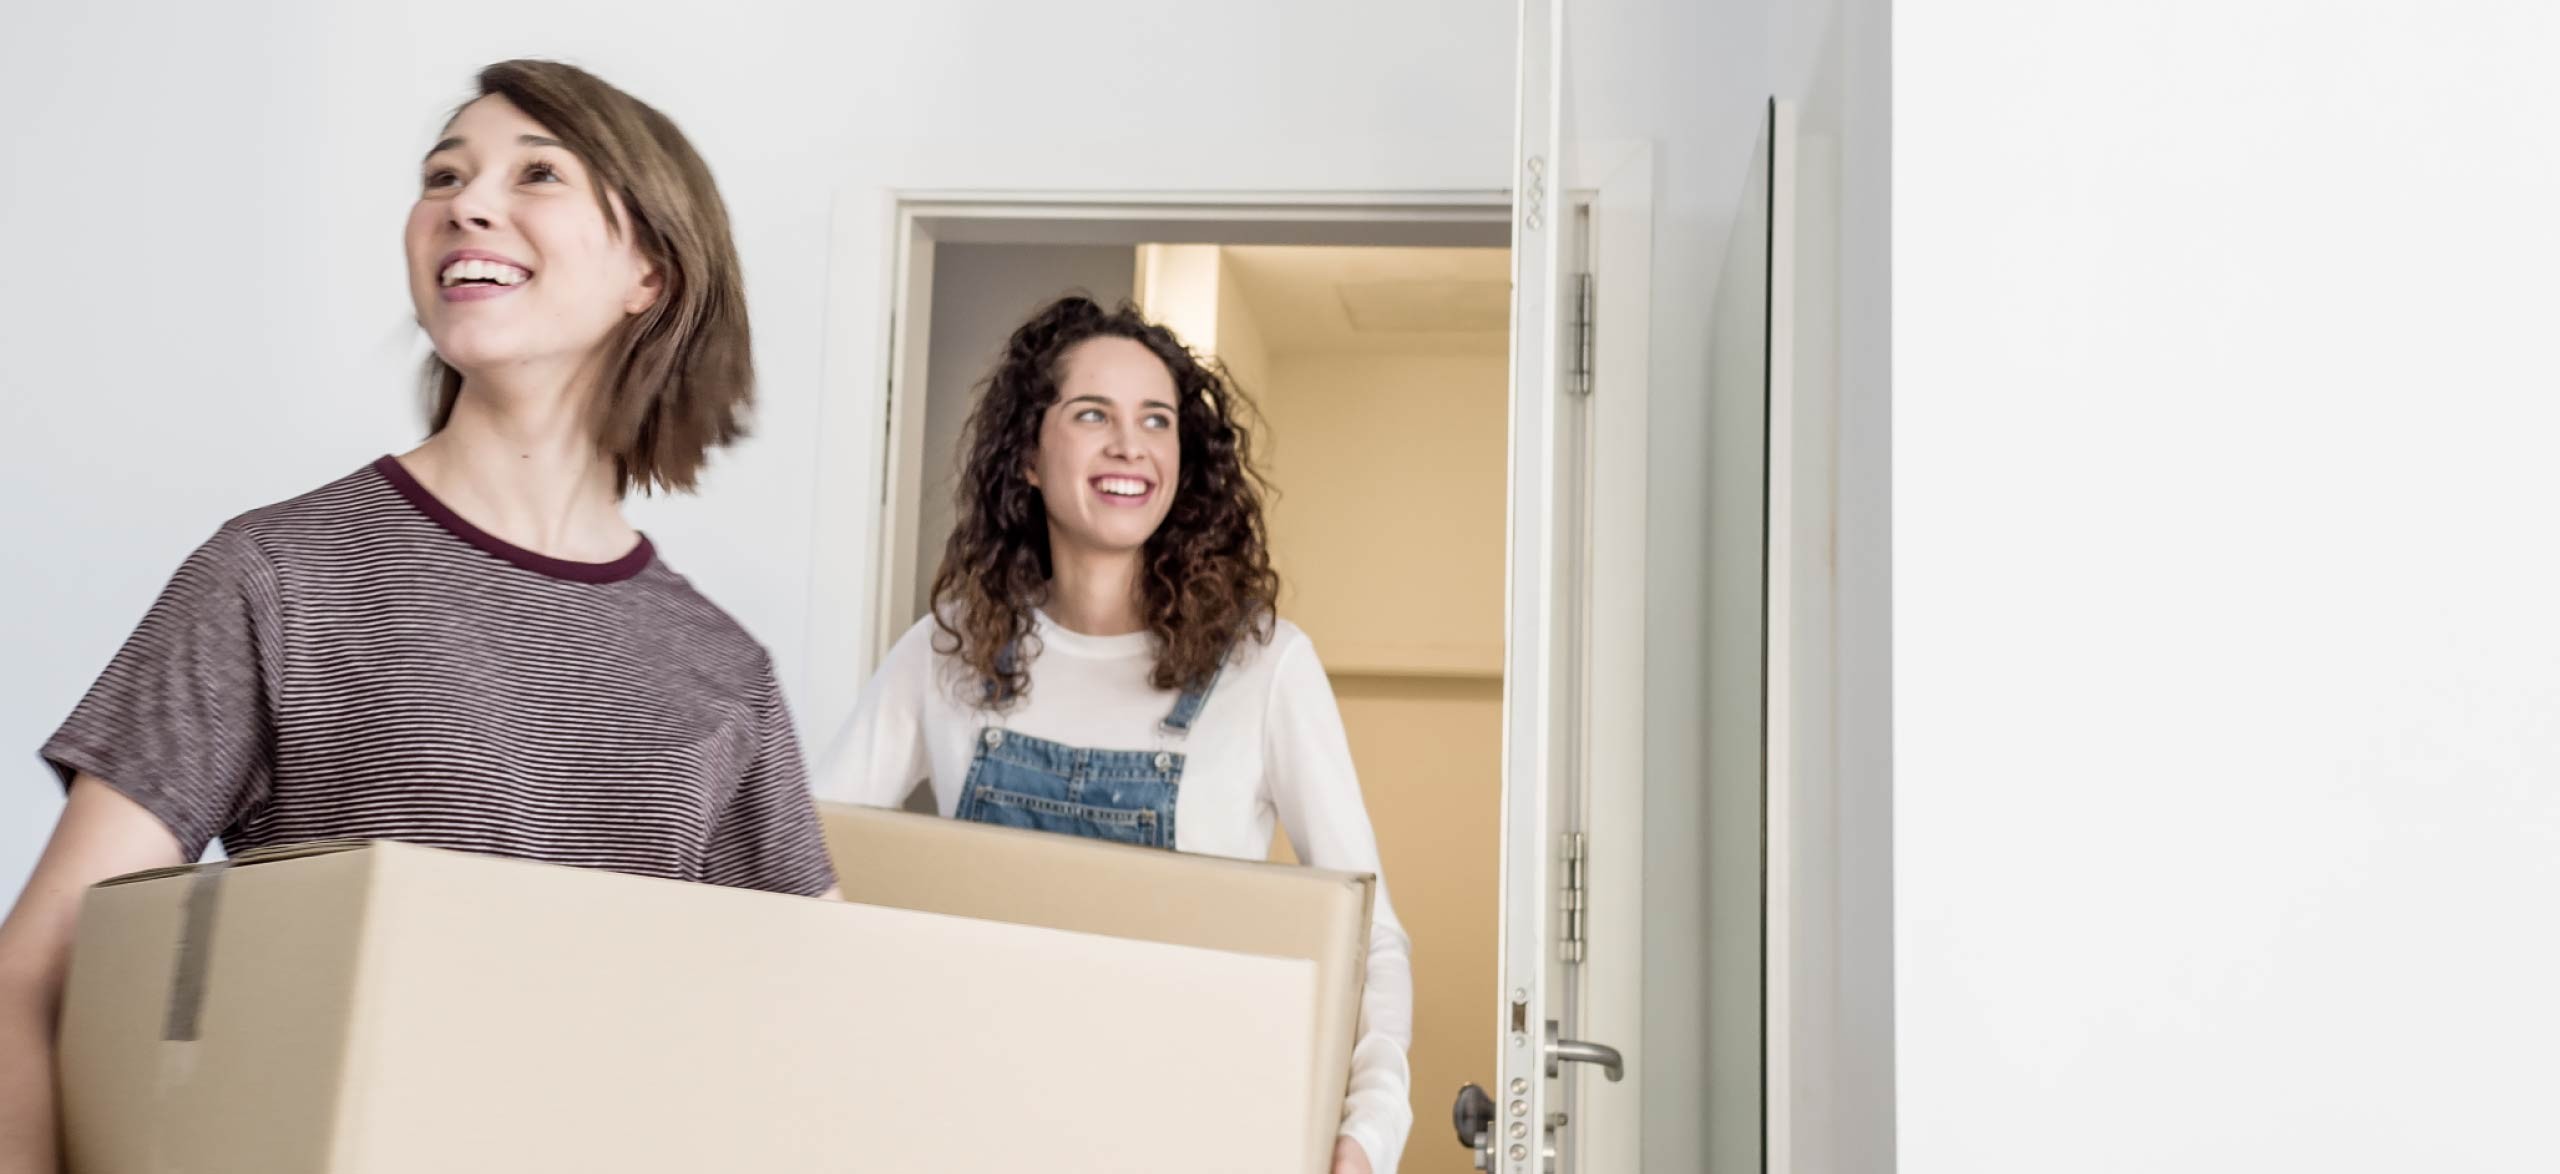 Two young people carry boxes into an apartment, smiling.